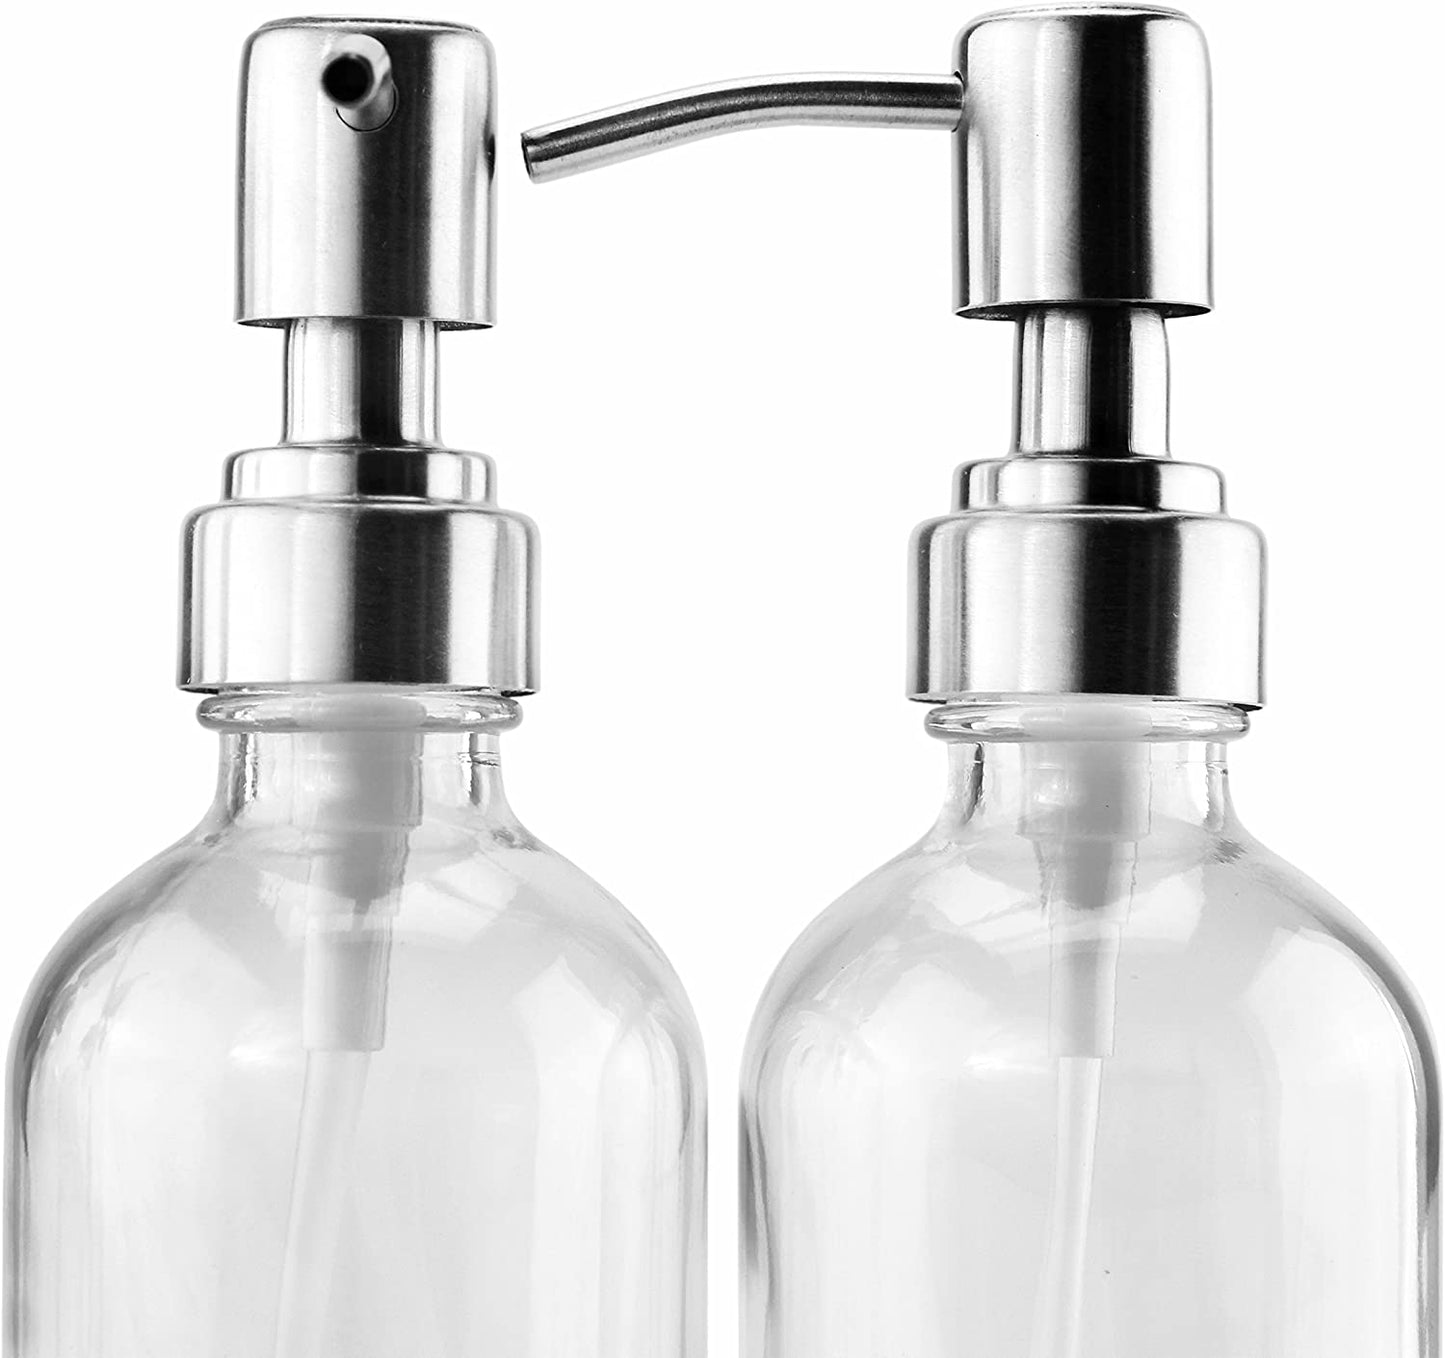 8oz Clear Glass Bottles w/ Stainless Steel Pumps (24-Pack) - SH_899_BUNDLE